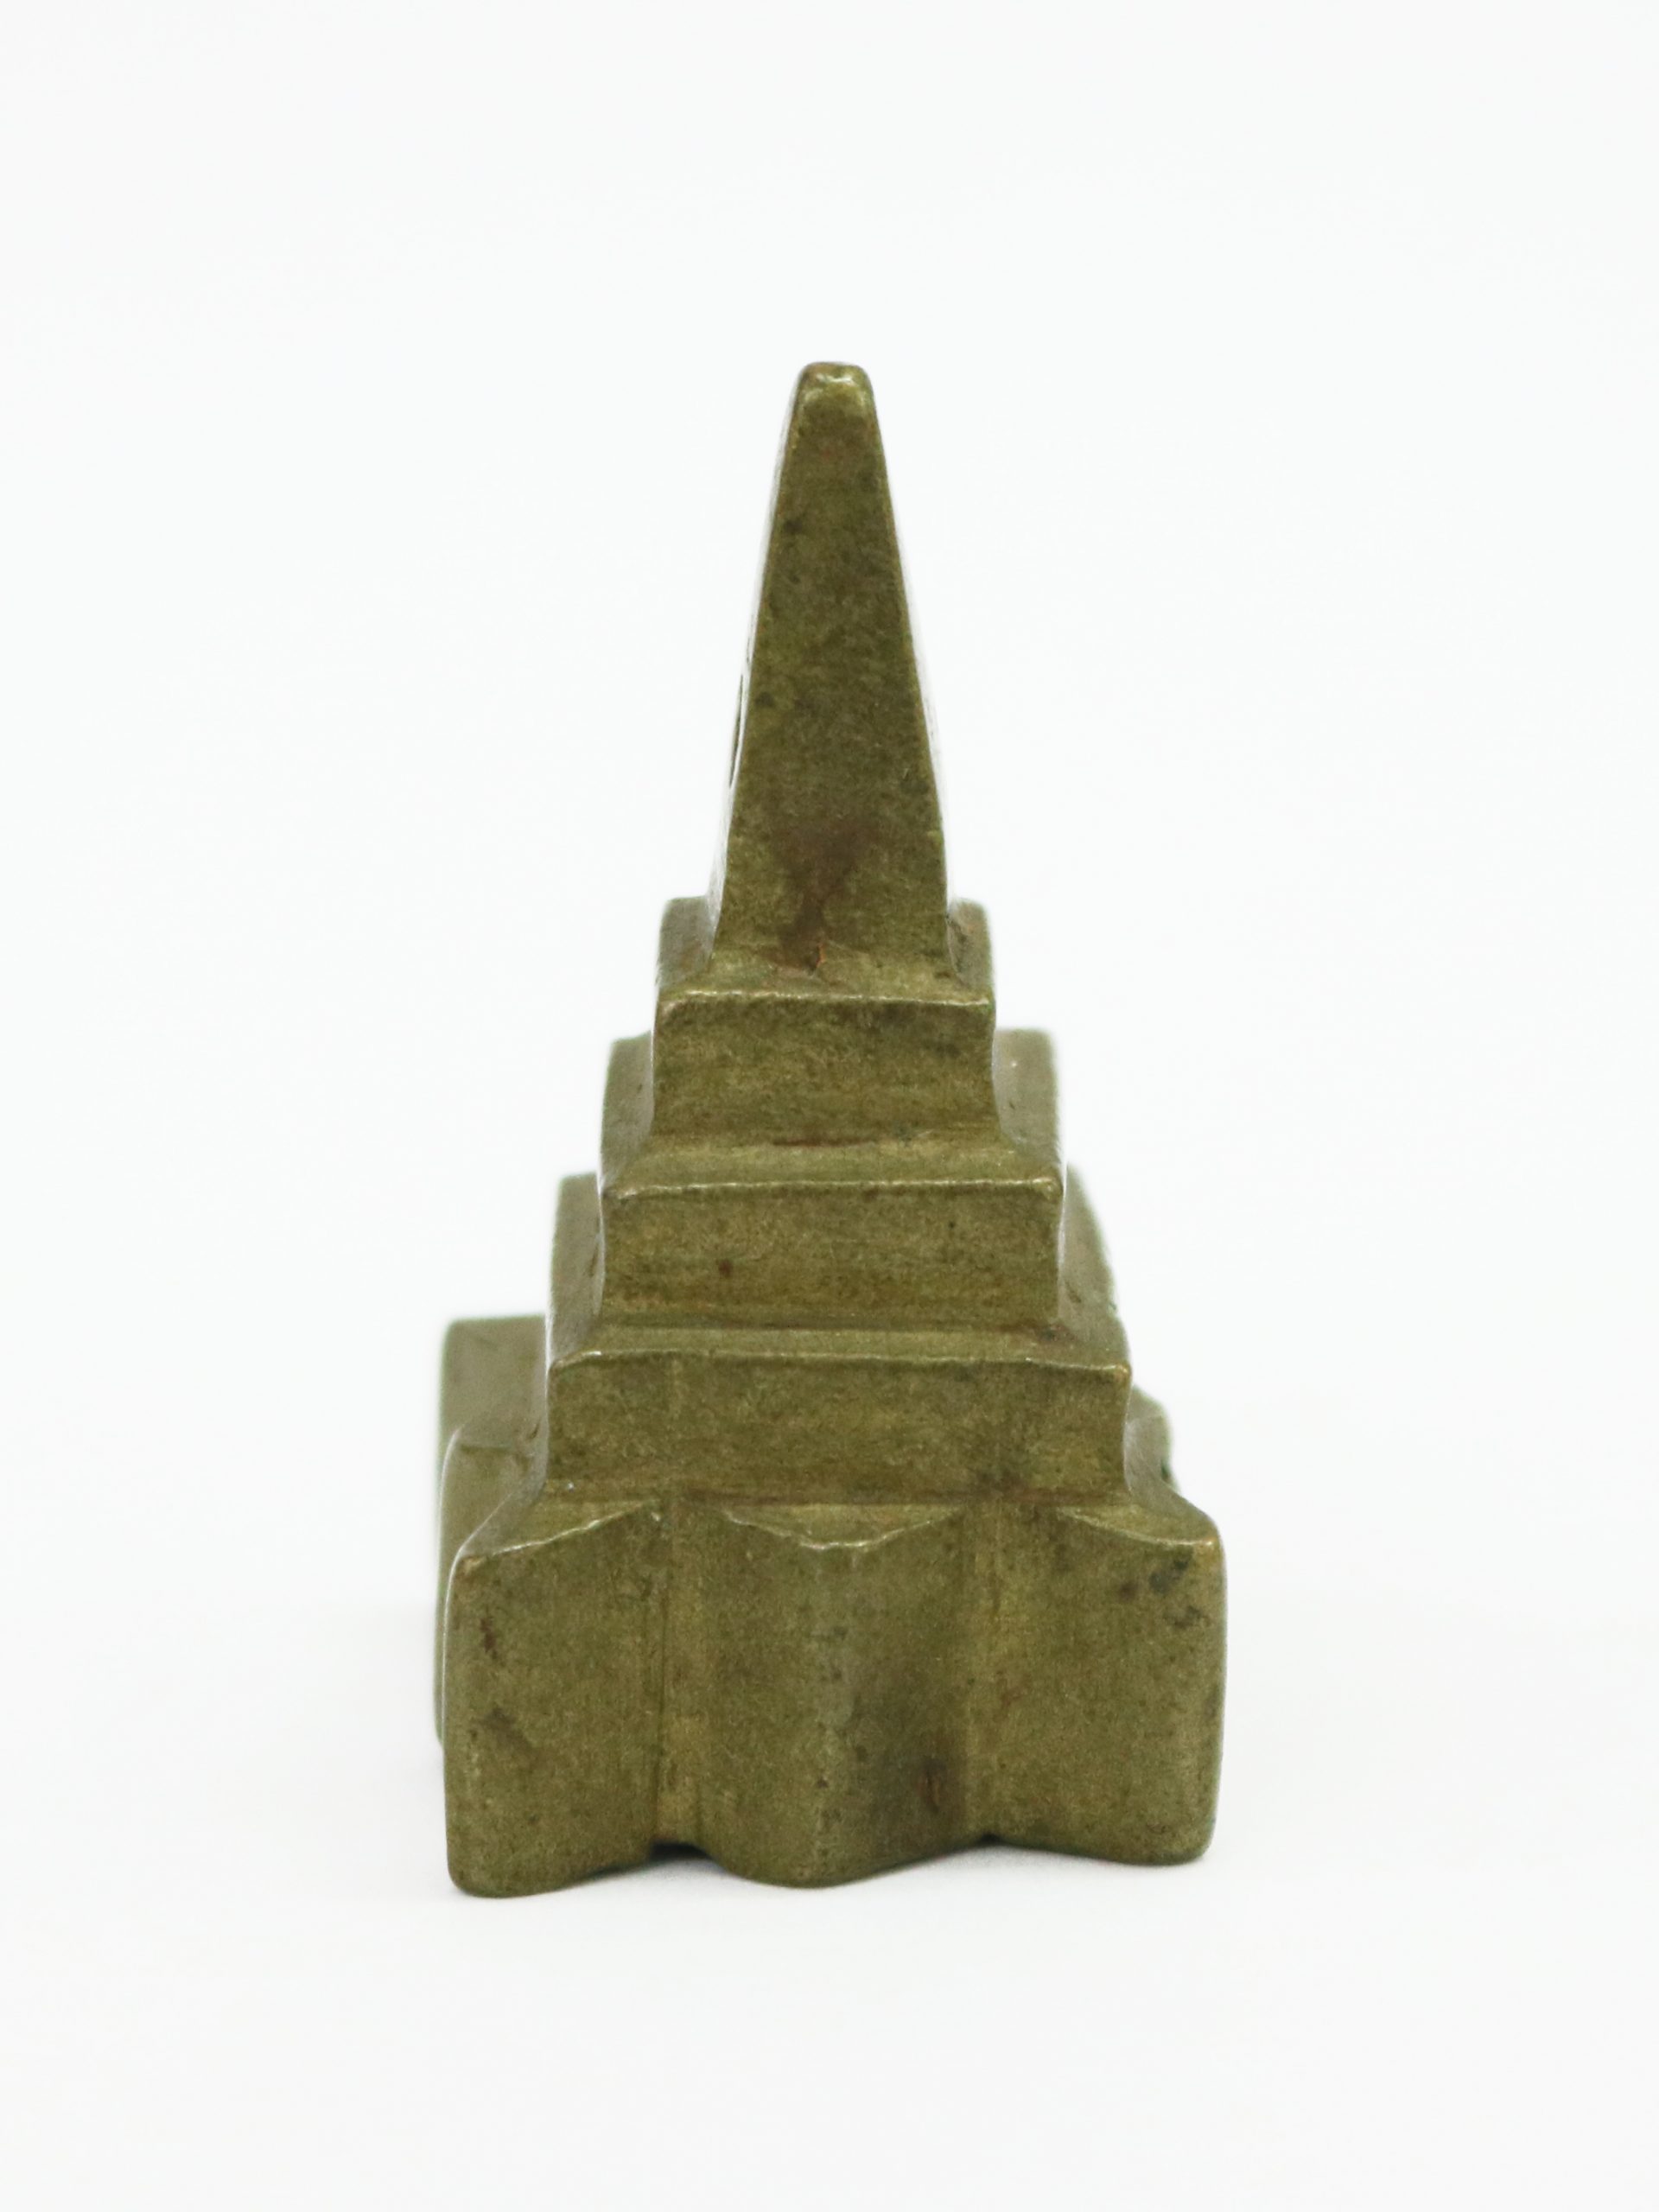 Brass goldweight in the shape of a 4-sided stepped pyramid